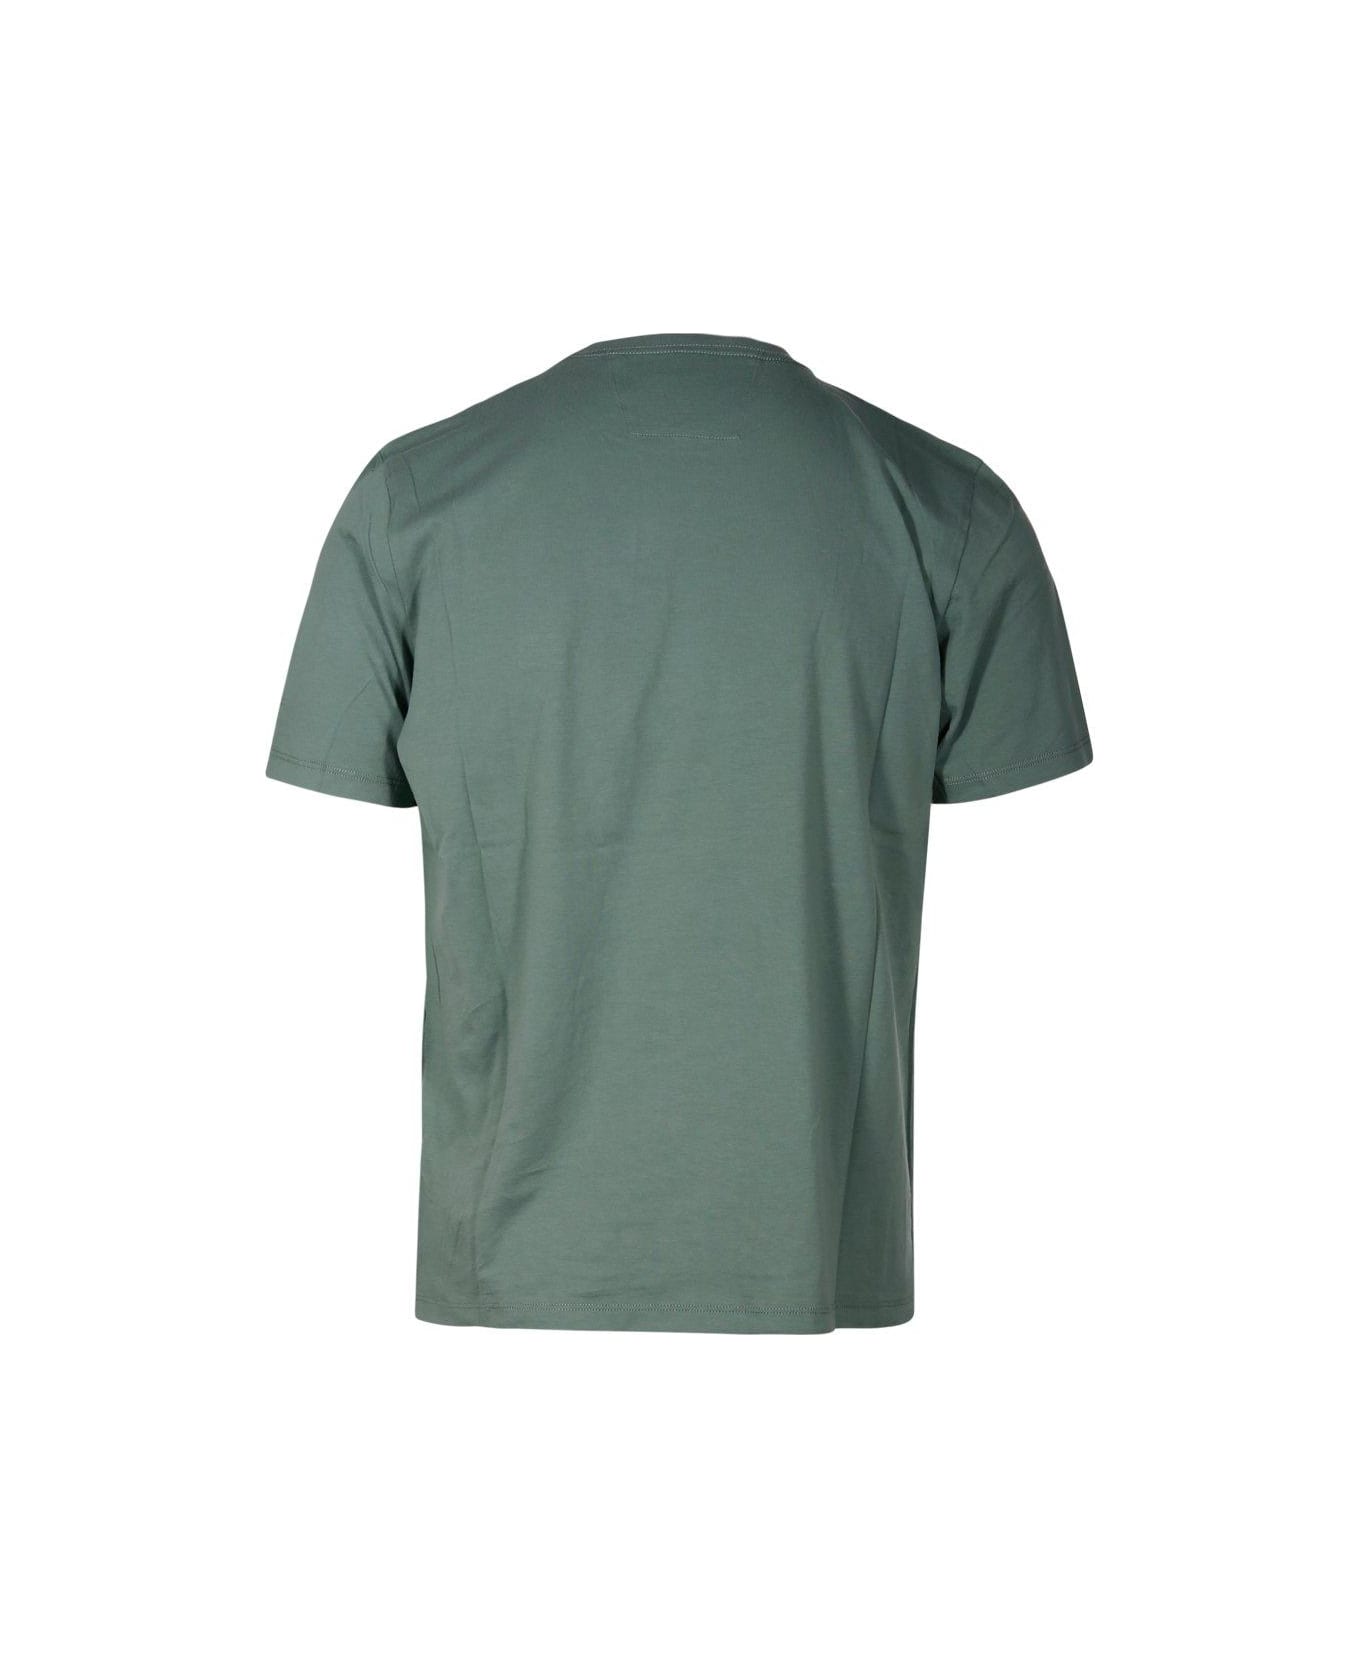 C.P. Company Logo Embroidered T-shirt - Verde